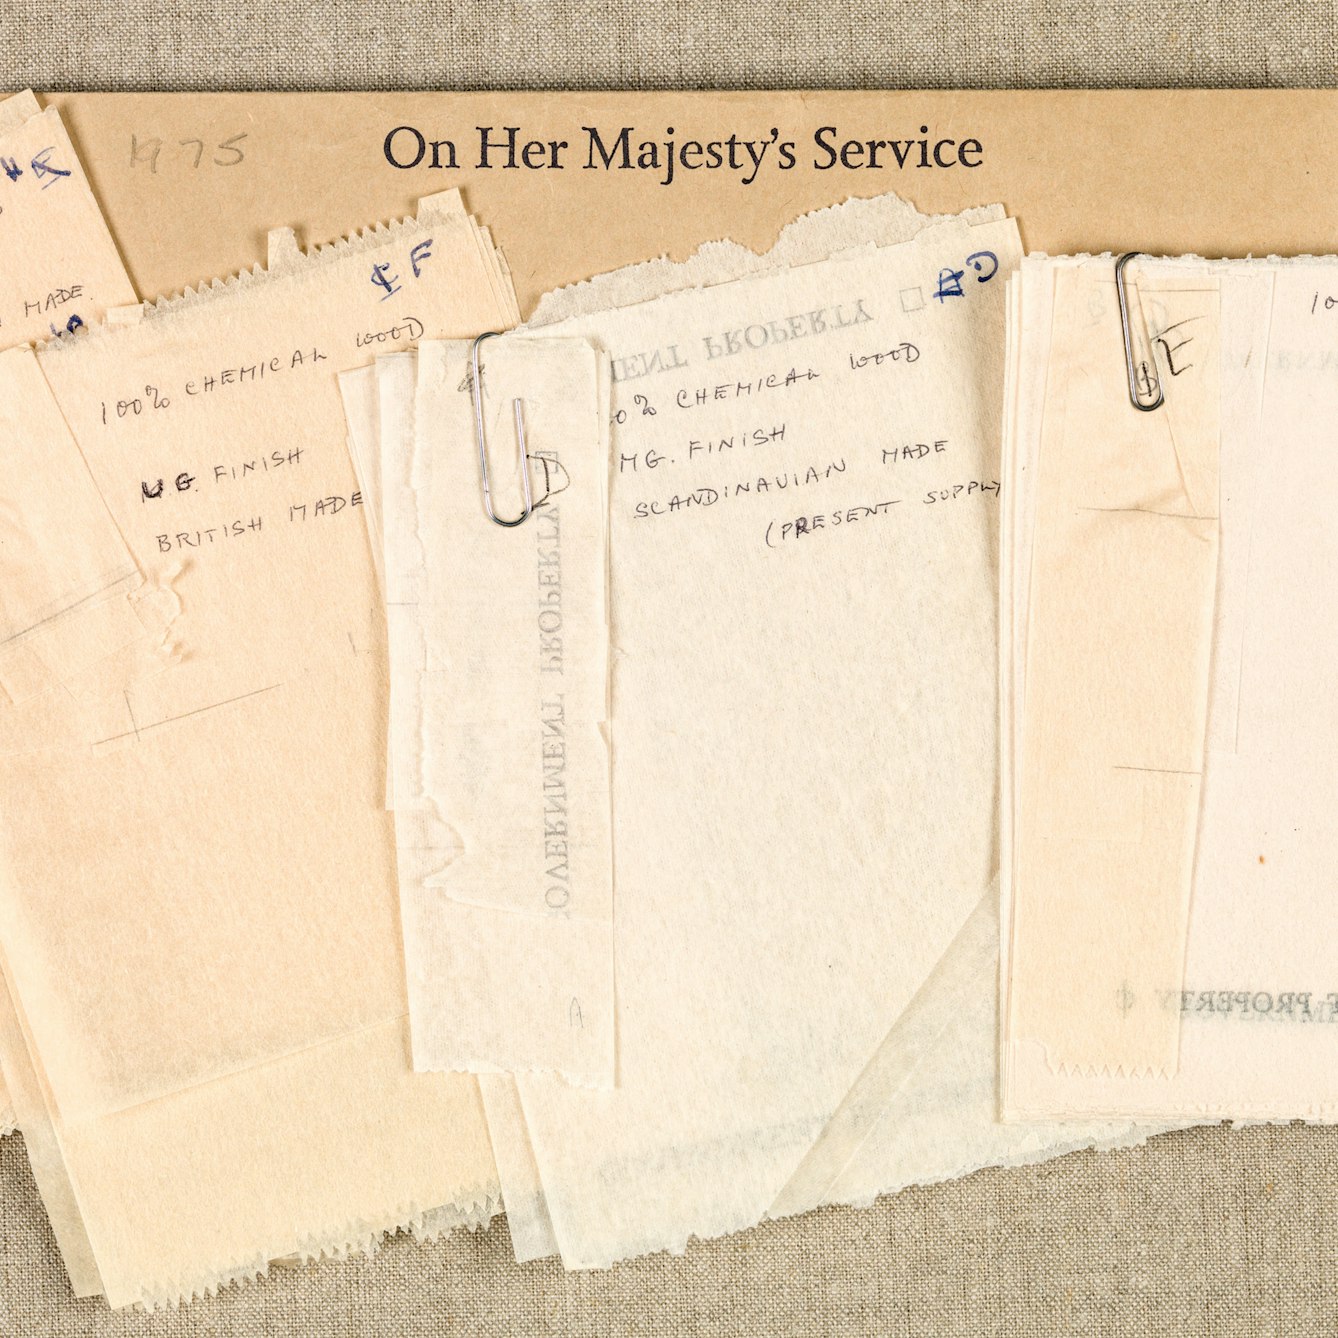 Photograph of a selection of toilet paper samples held together with paperclips, resting on a manilla envelope printed with the words "On Her Majesty's Service".